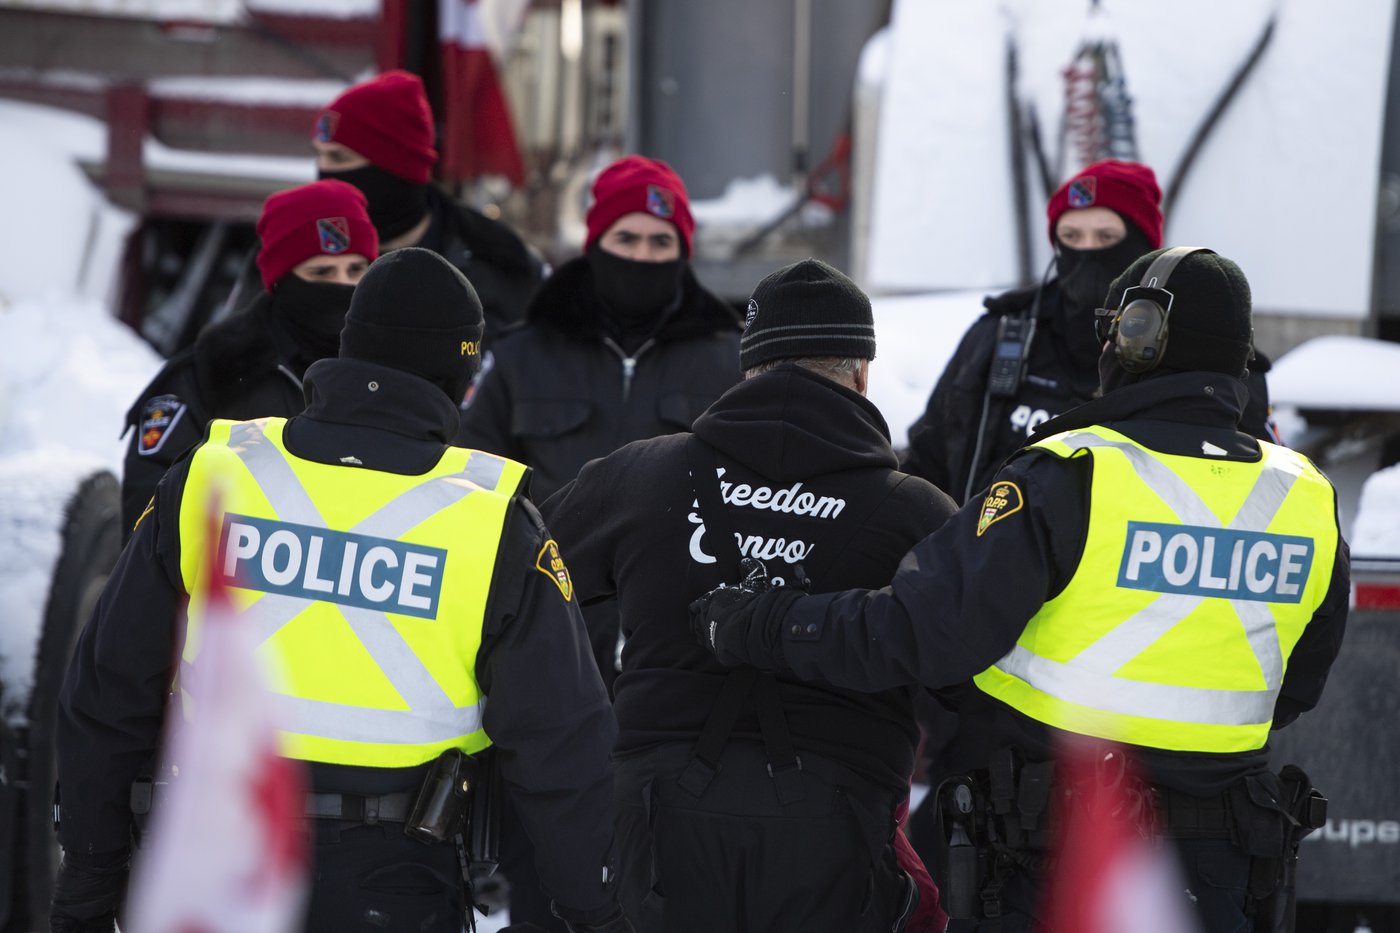 Ottawa Police Arrest 100 protesters. Ледяная полиция Канада. Police crackdown. Girls protesters Handcuffed Arrested.